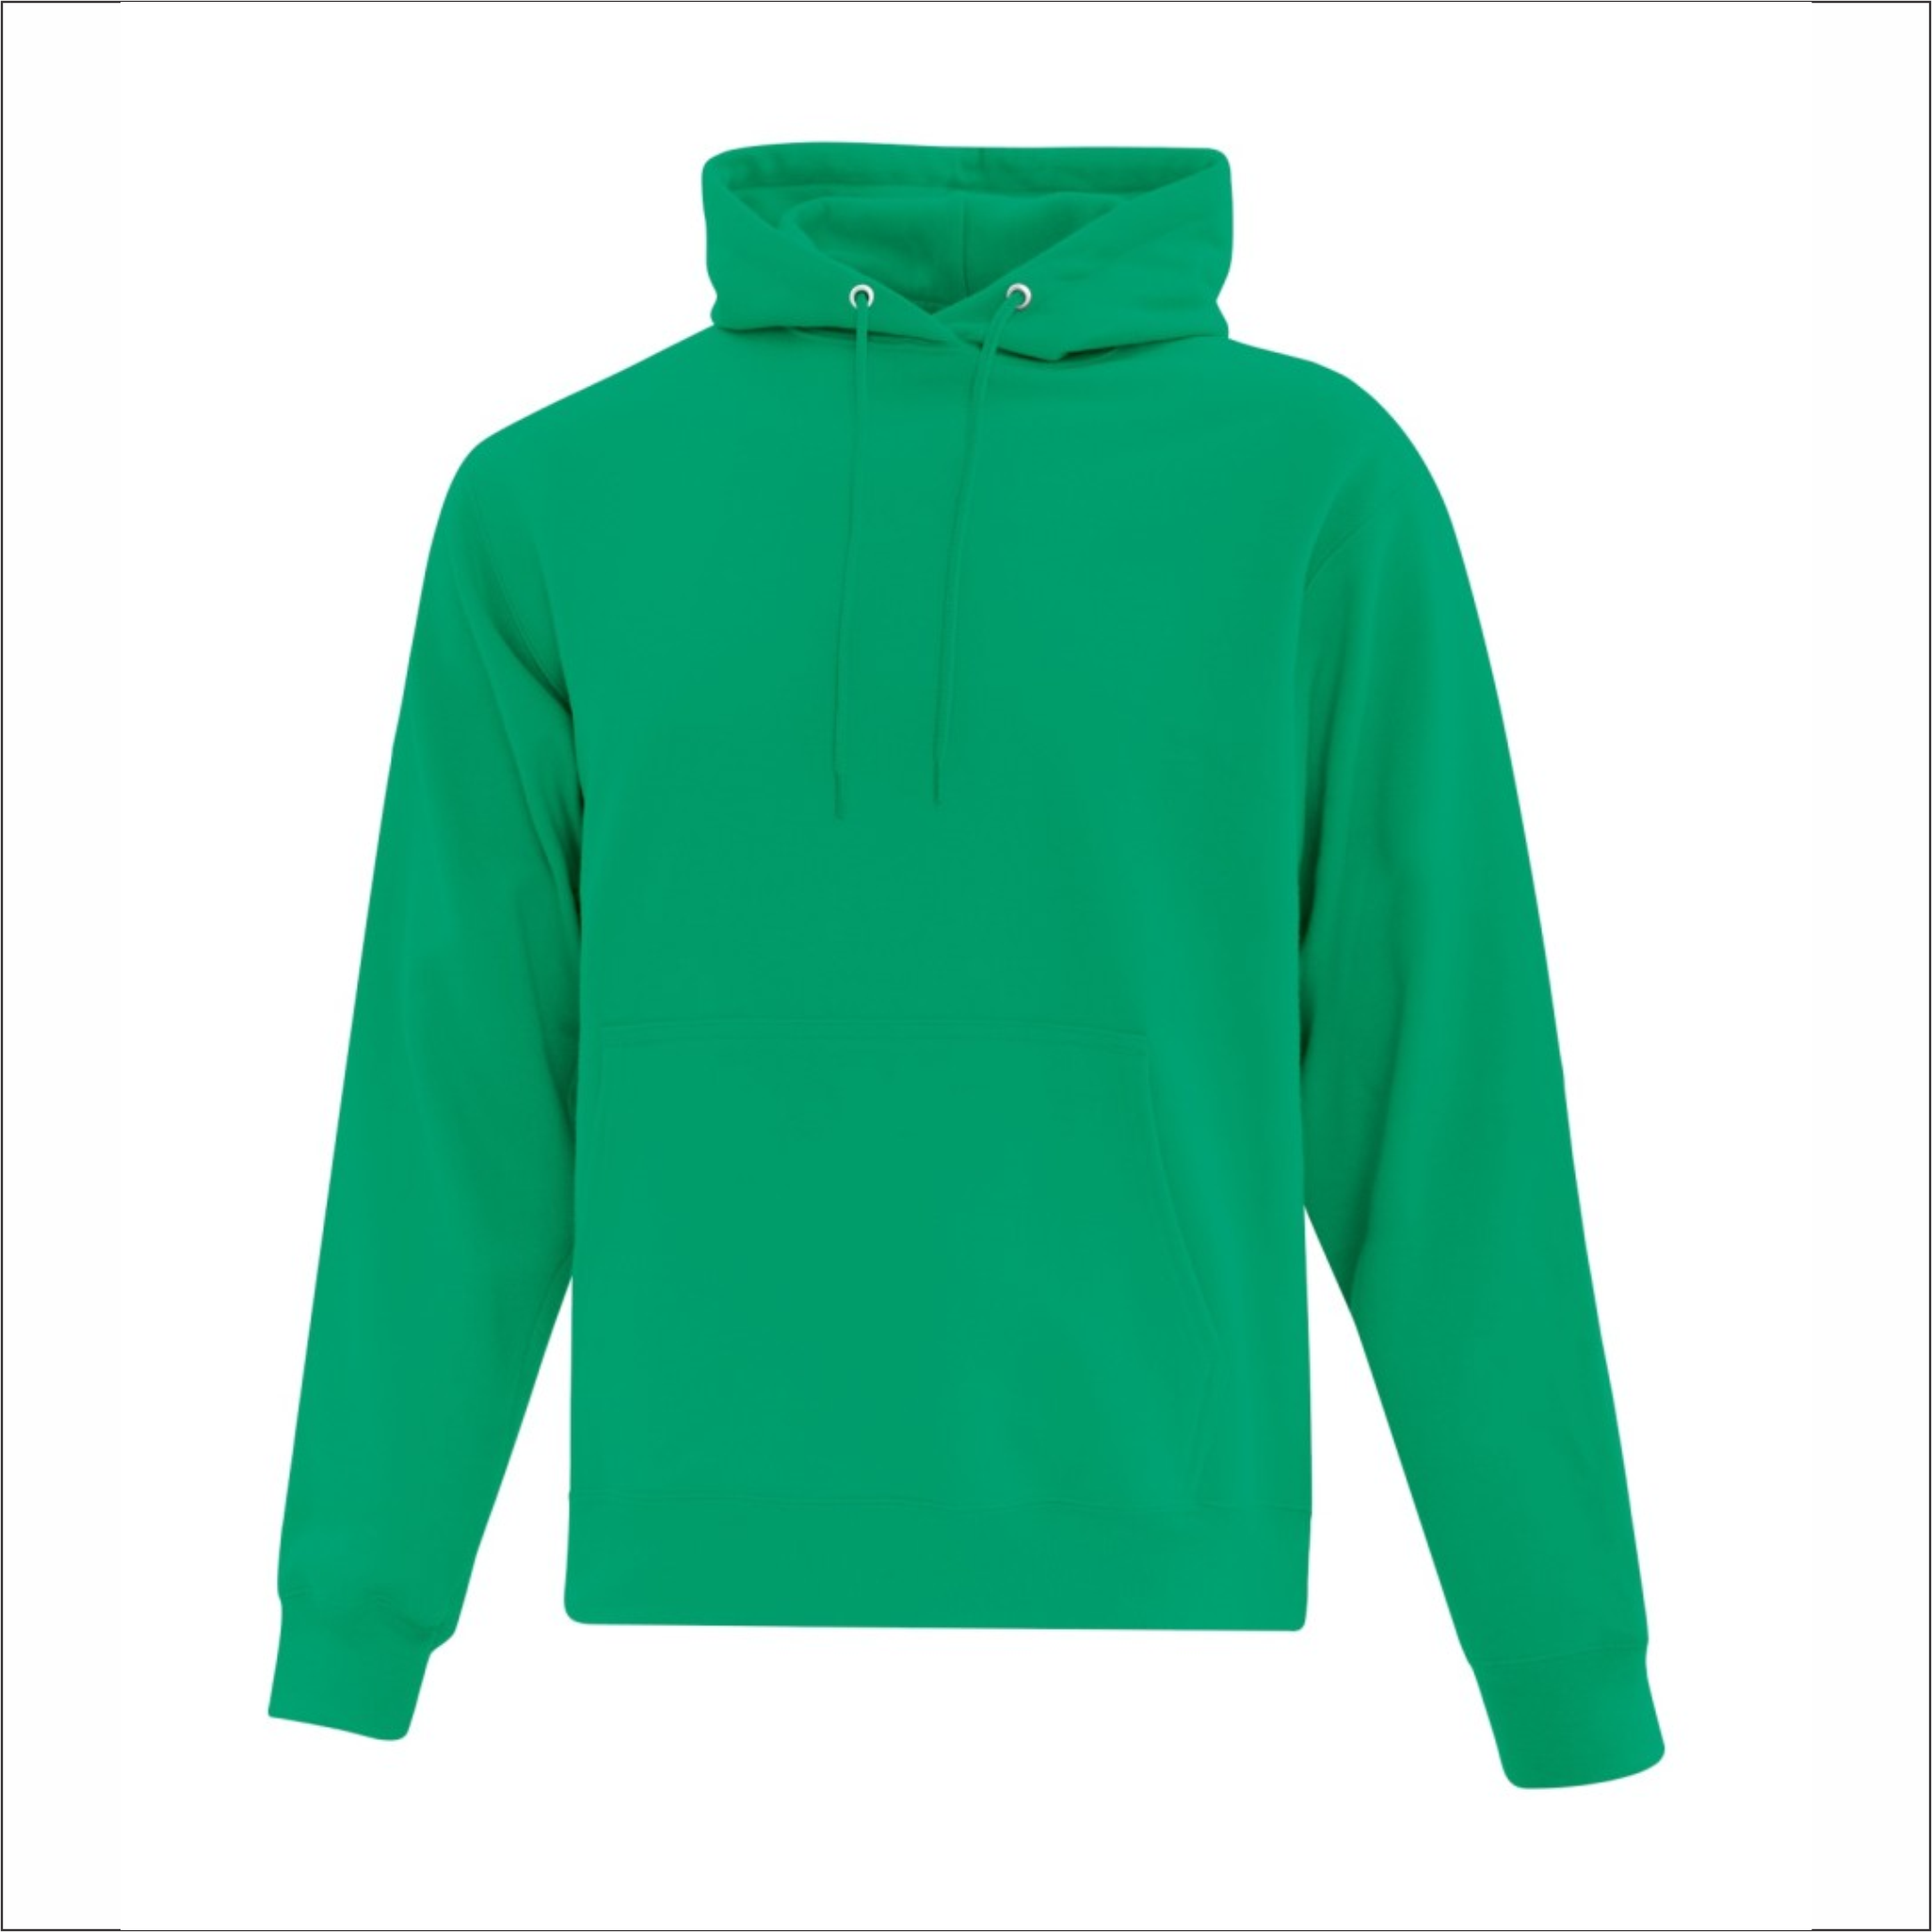 Kelly Products Adult Hoodie - Cotton/Polyester - ATC F2500